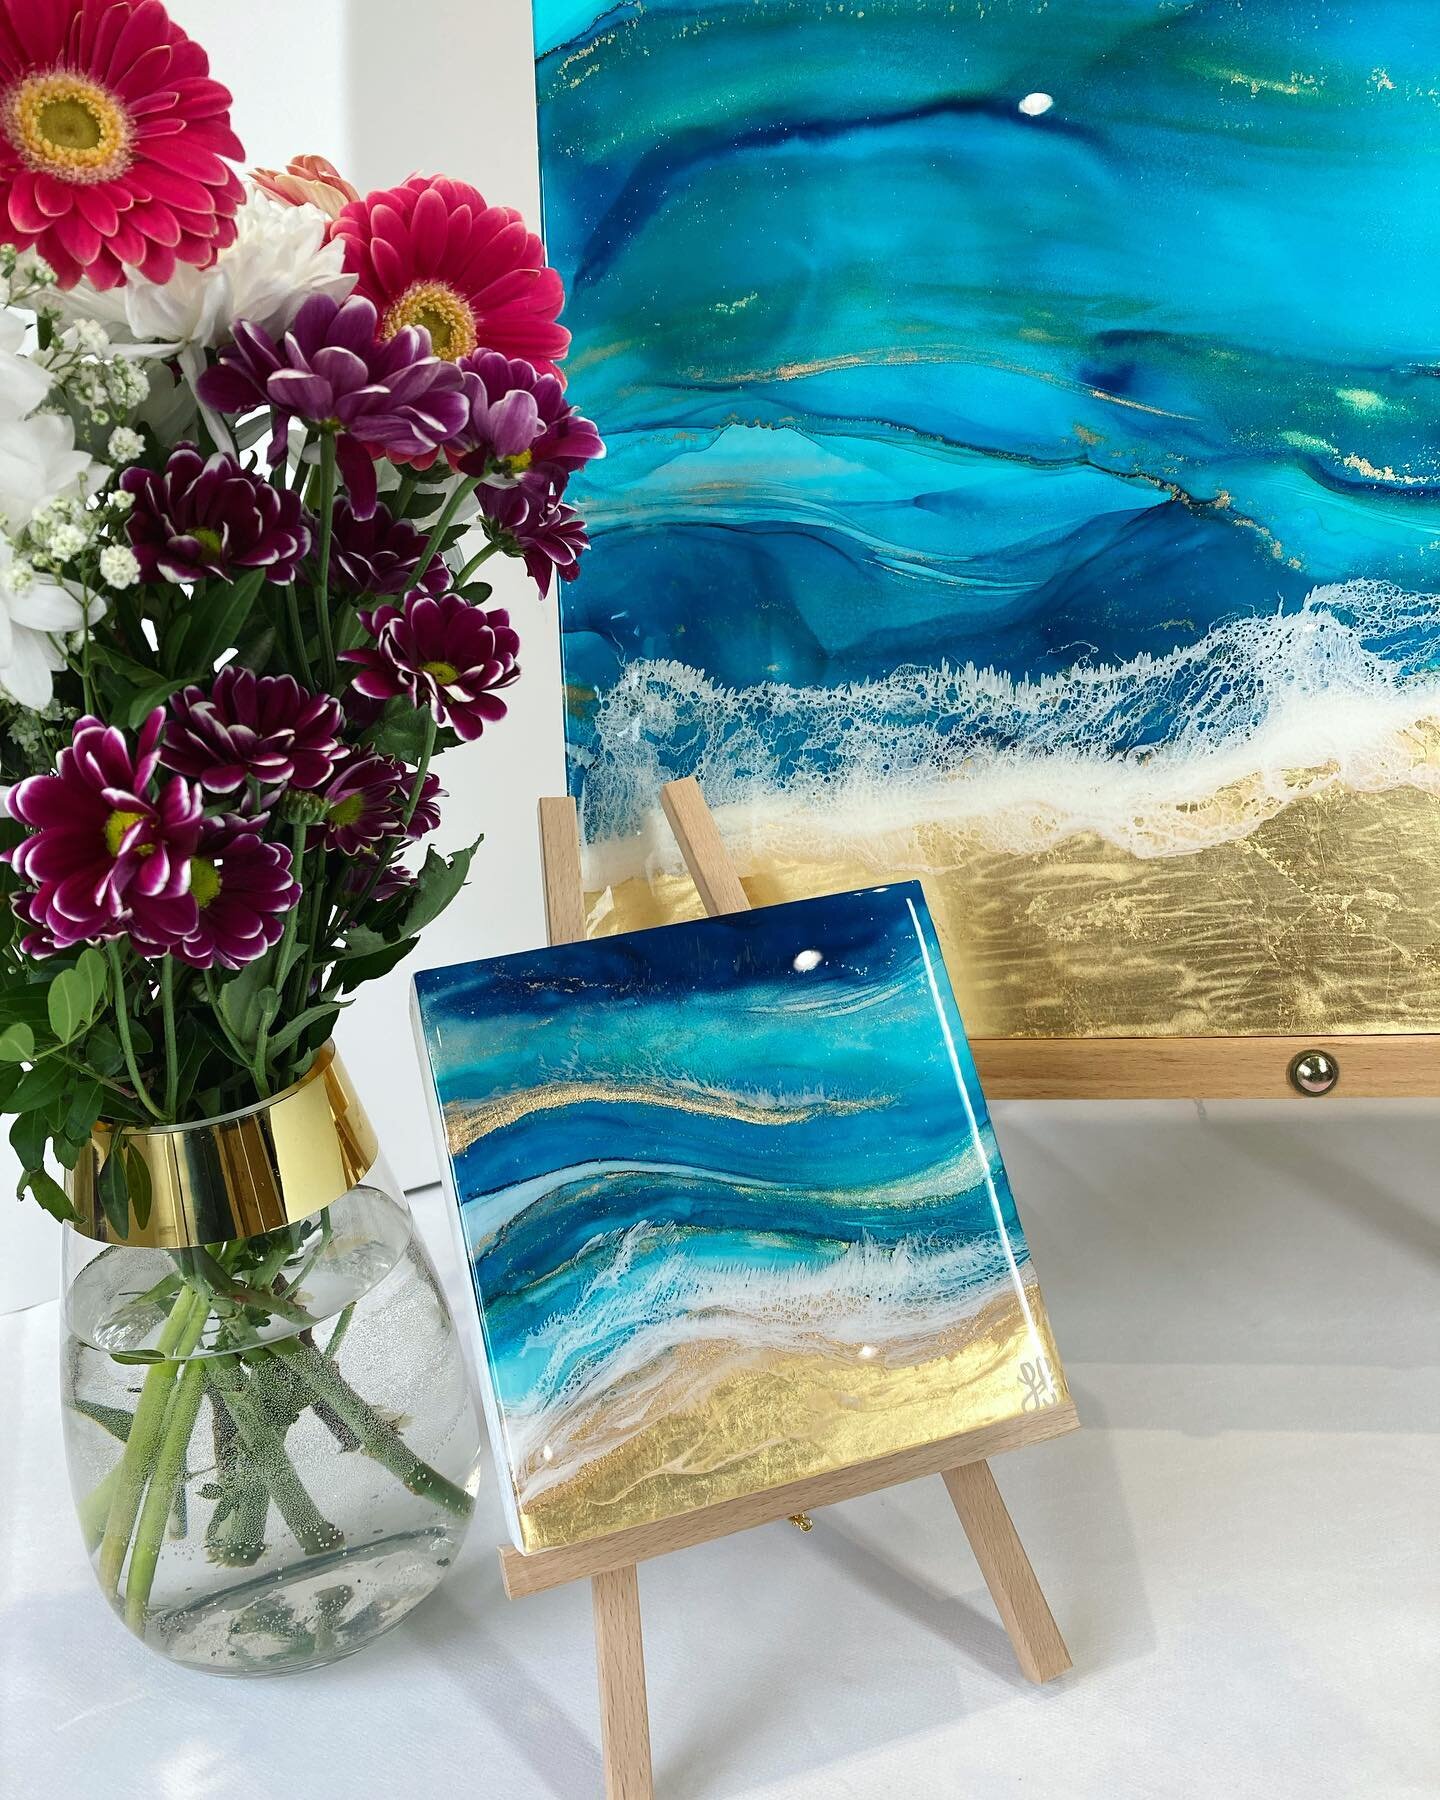 Little and Large waves 🌊🥰

This mini wave painting is ✨available✨ at the newly opened Gallery Restaurant within the @buchananarmsdrymen hotel. Swipe for close up details of it ☺️ 

It&rsquo;s such a gorgeous little painting and would bring a pop of